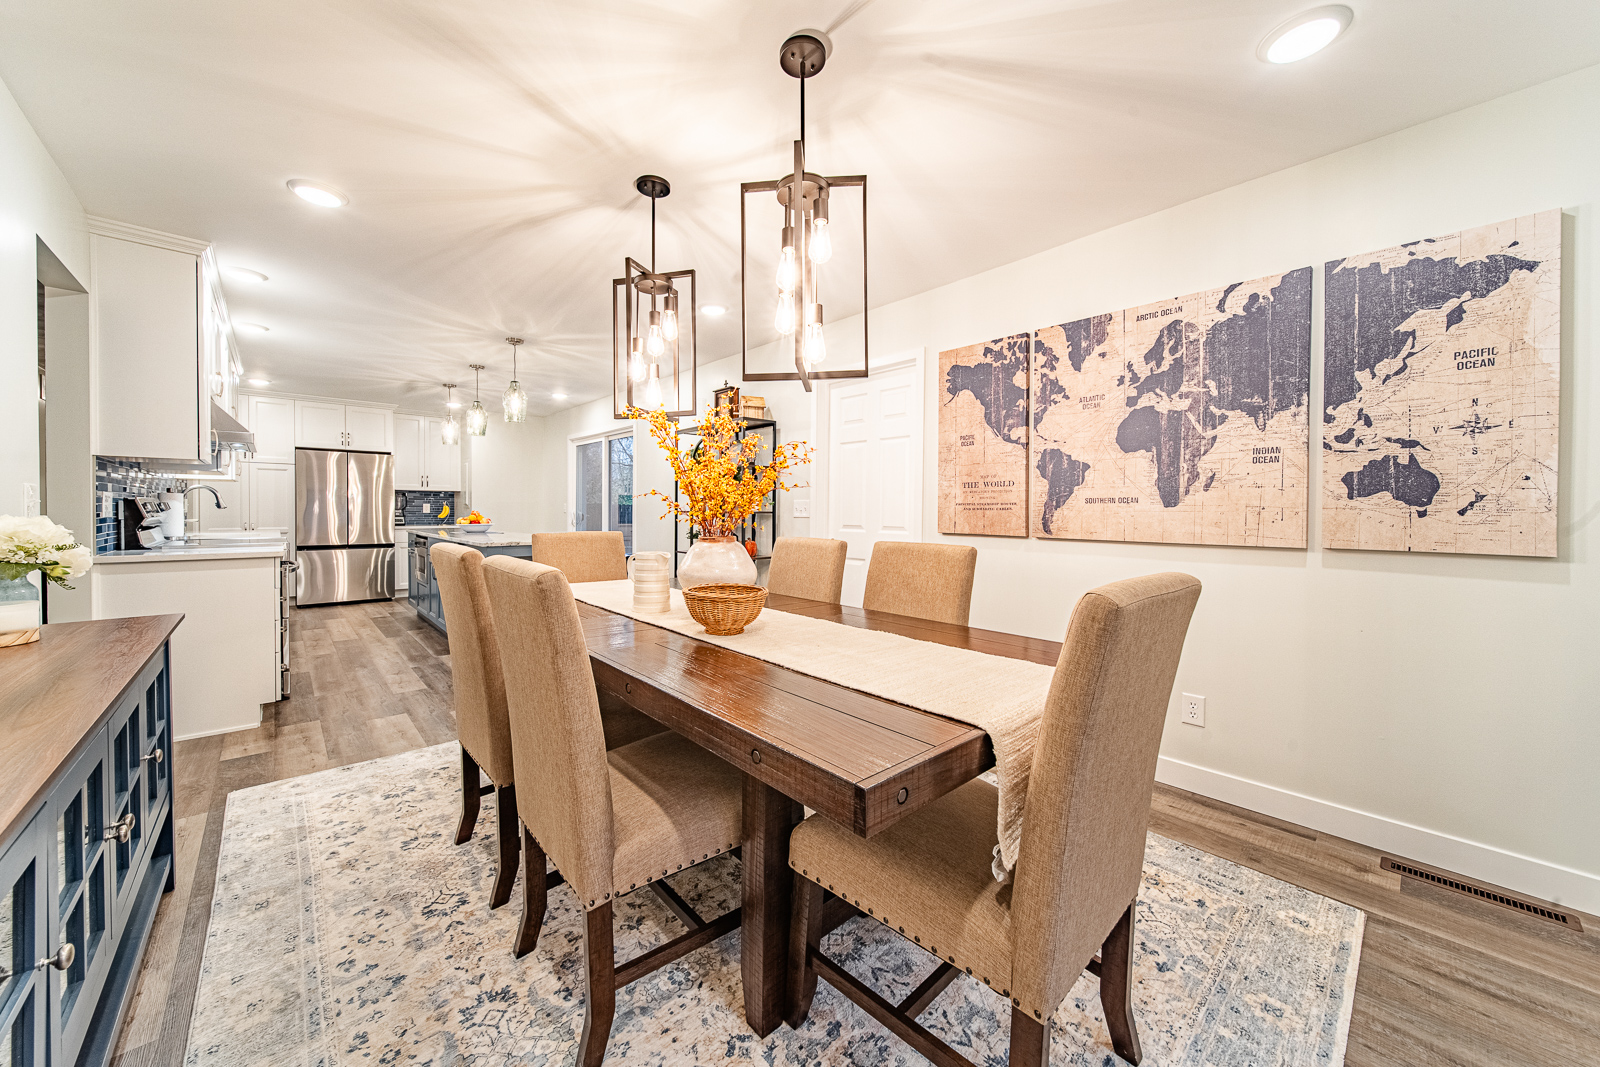 Modern and inviting dining area as part of a home remodel in Tippecanoe County, Indiana.